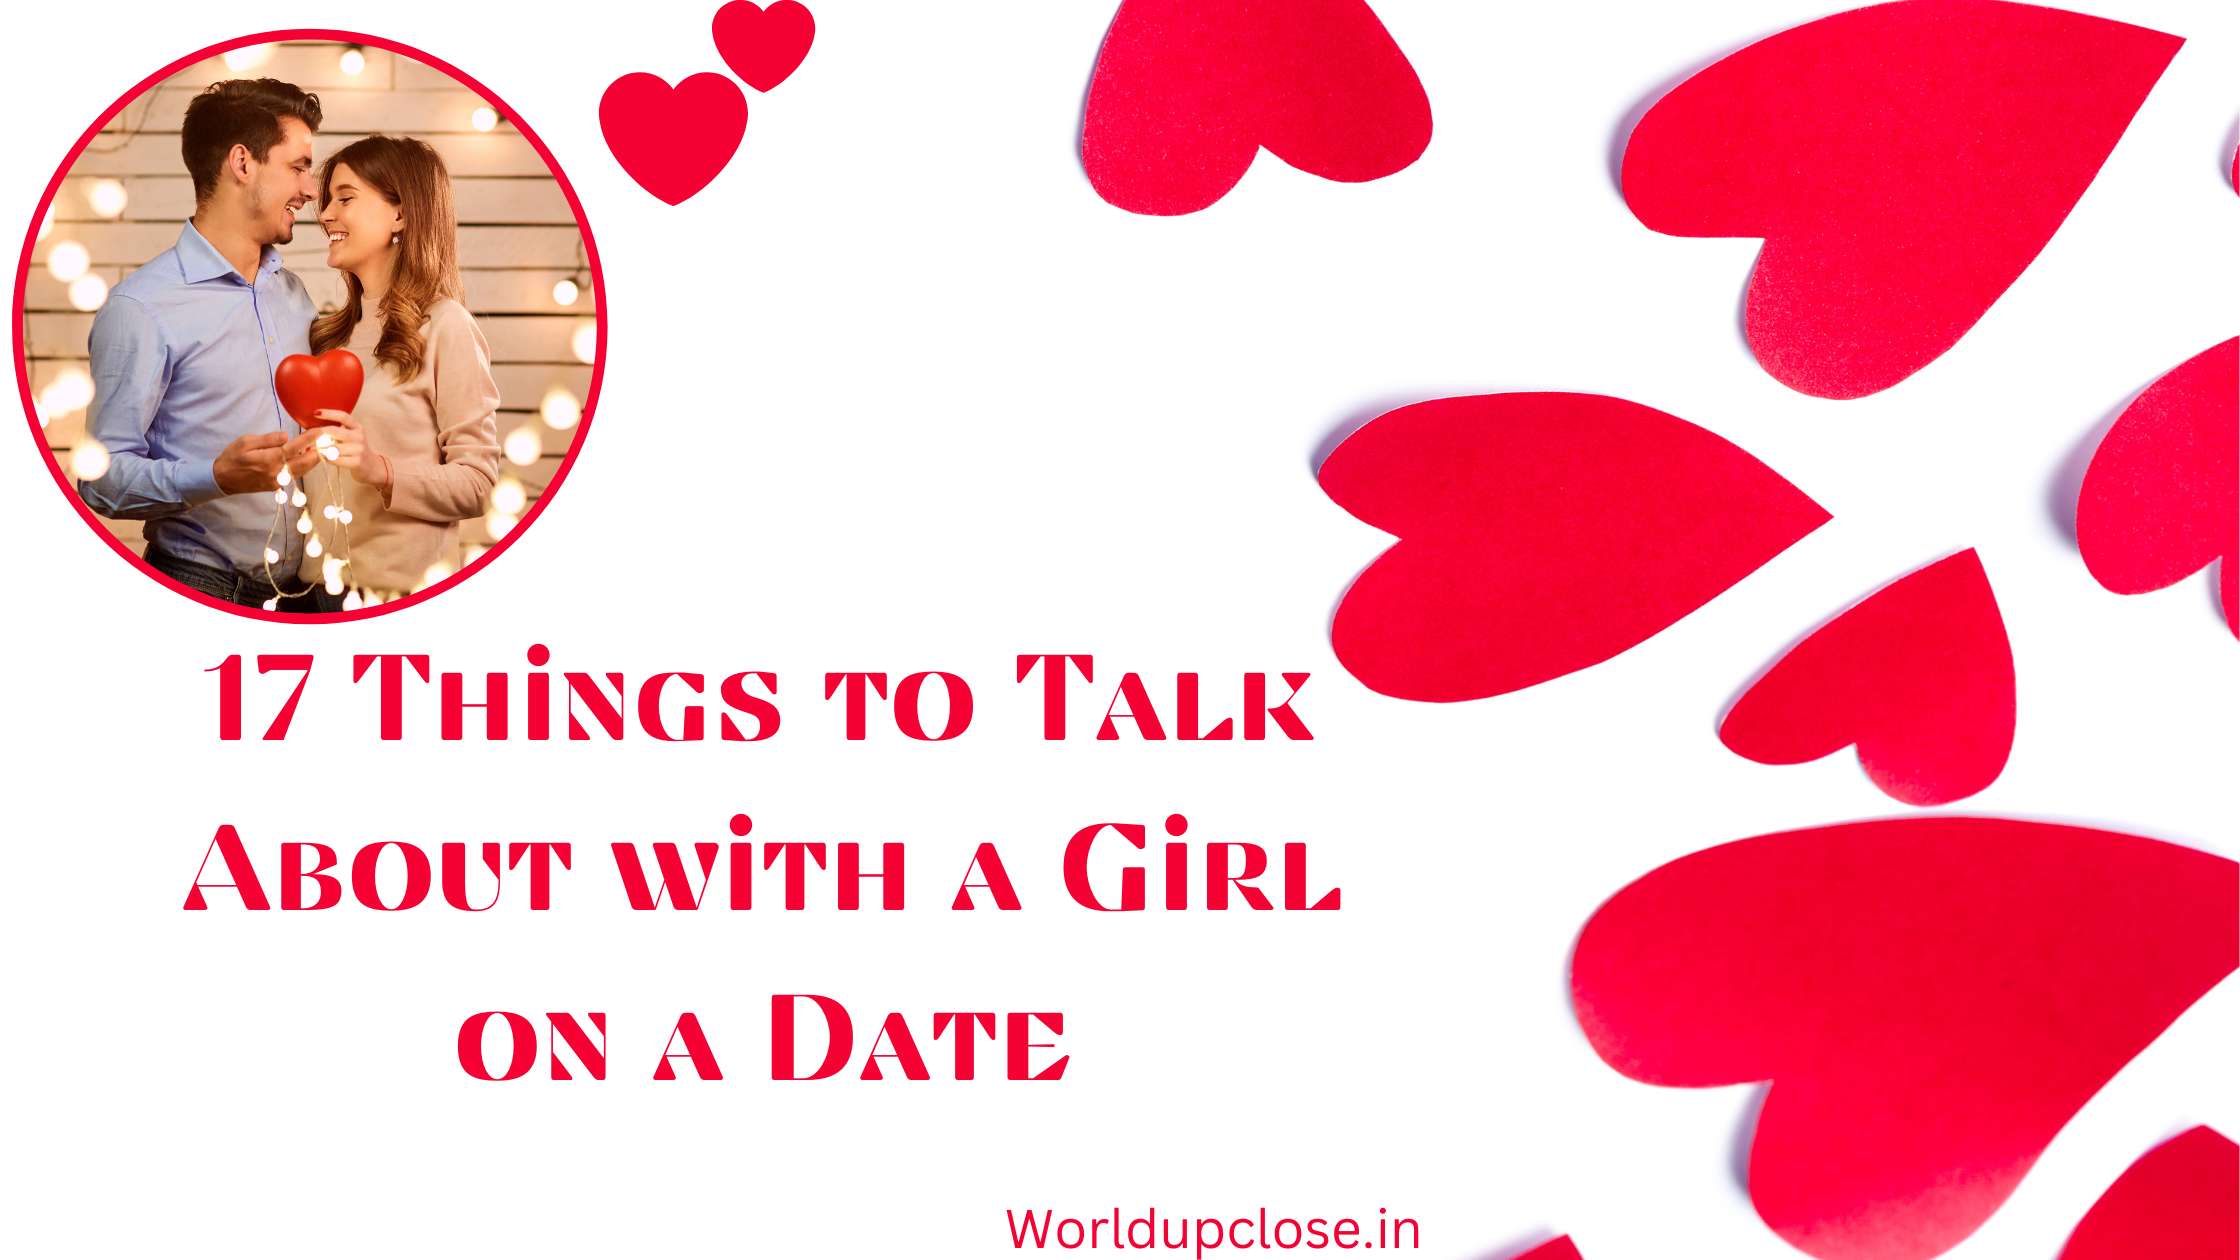 17 Things to Talk About with a Girl on a Date 7